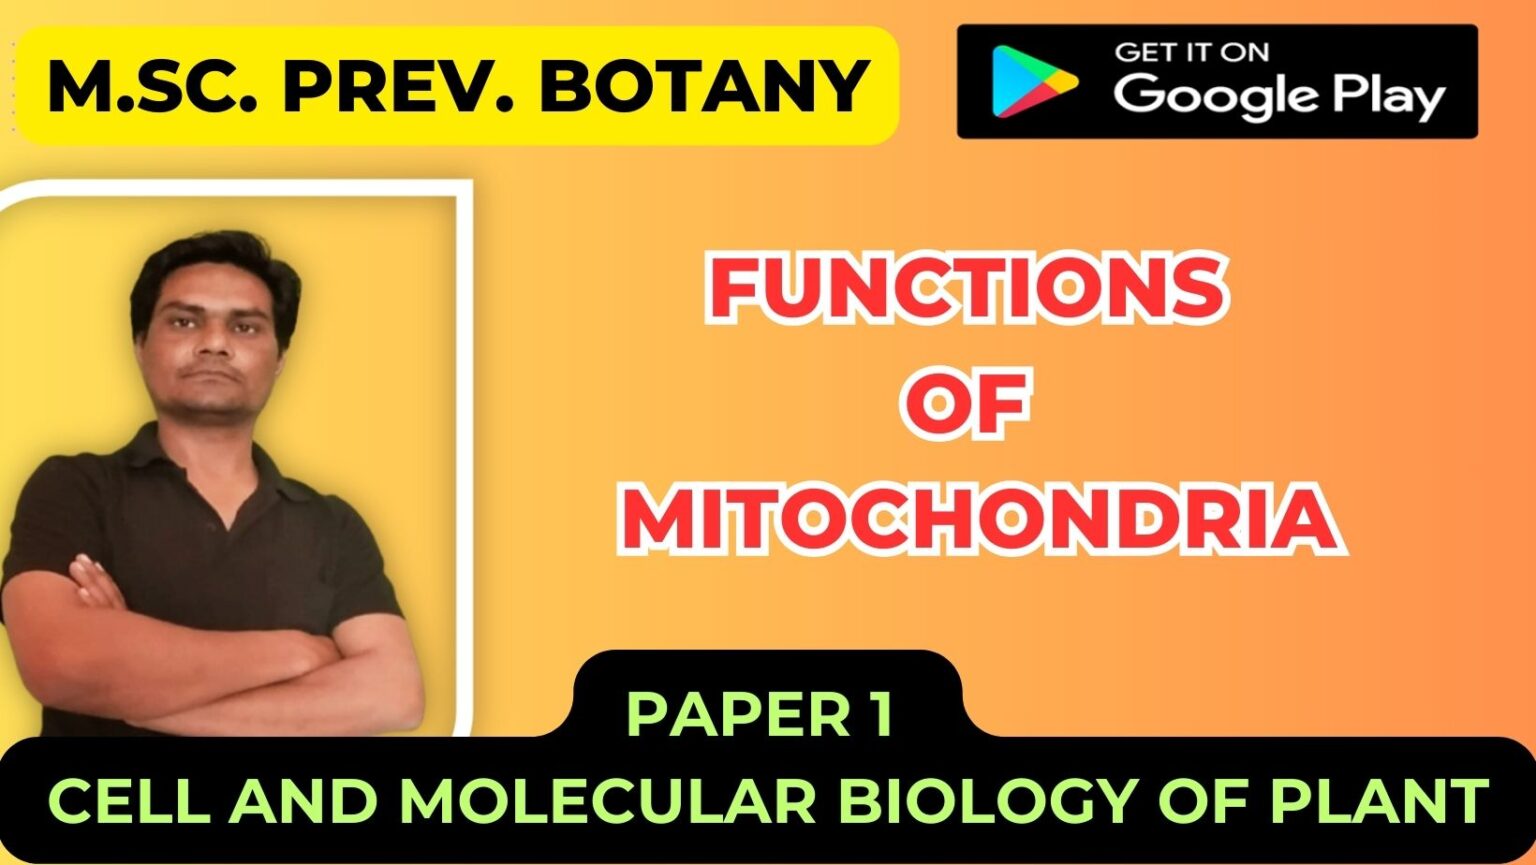 Functions of Mitochondria